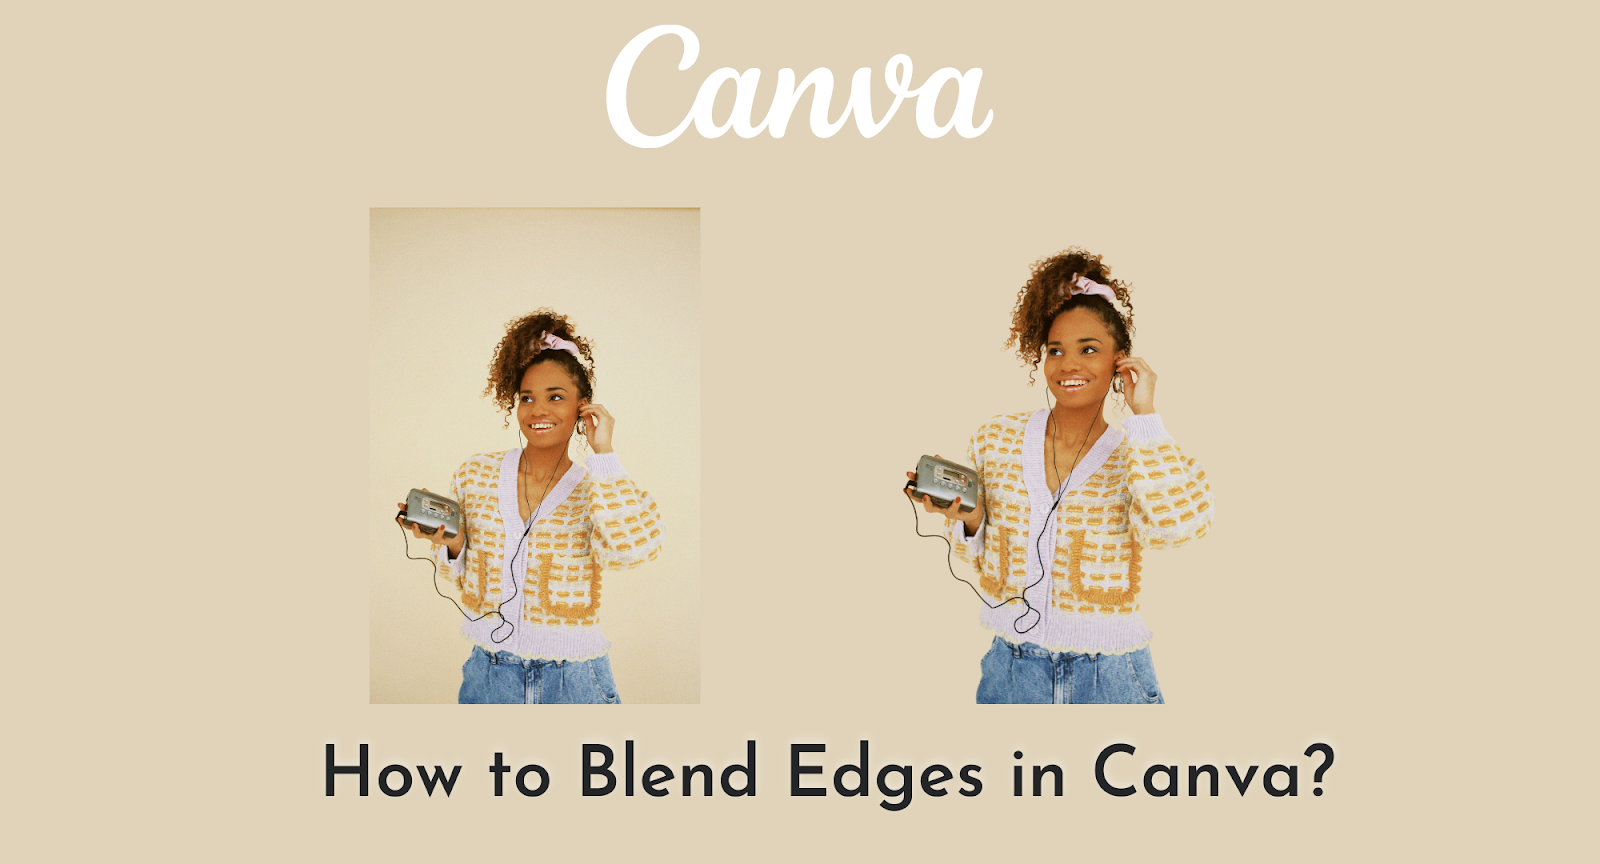 How to Blend Edges in Canva?